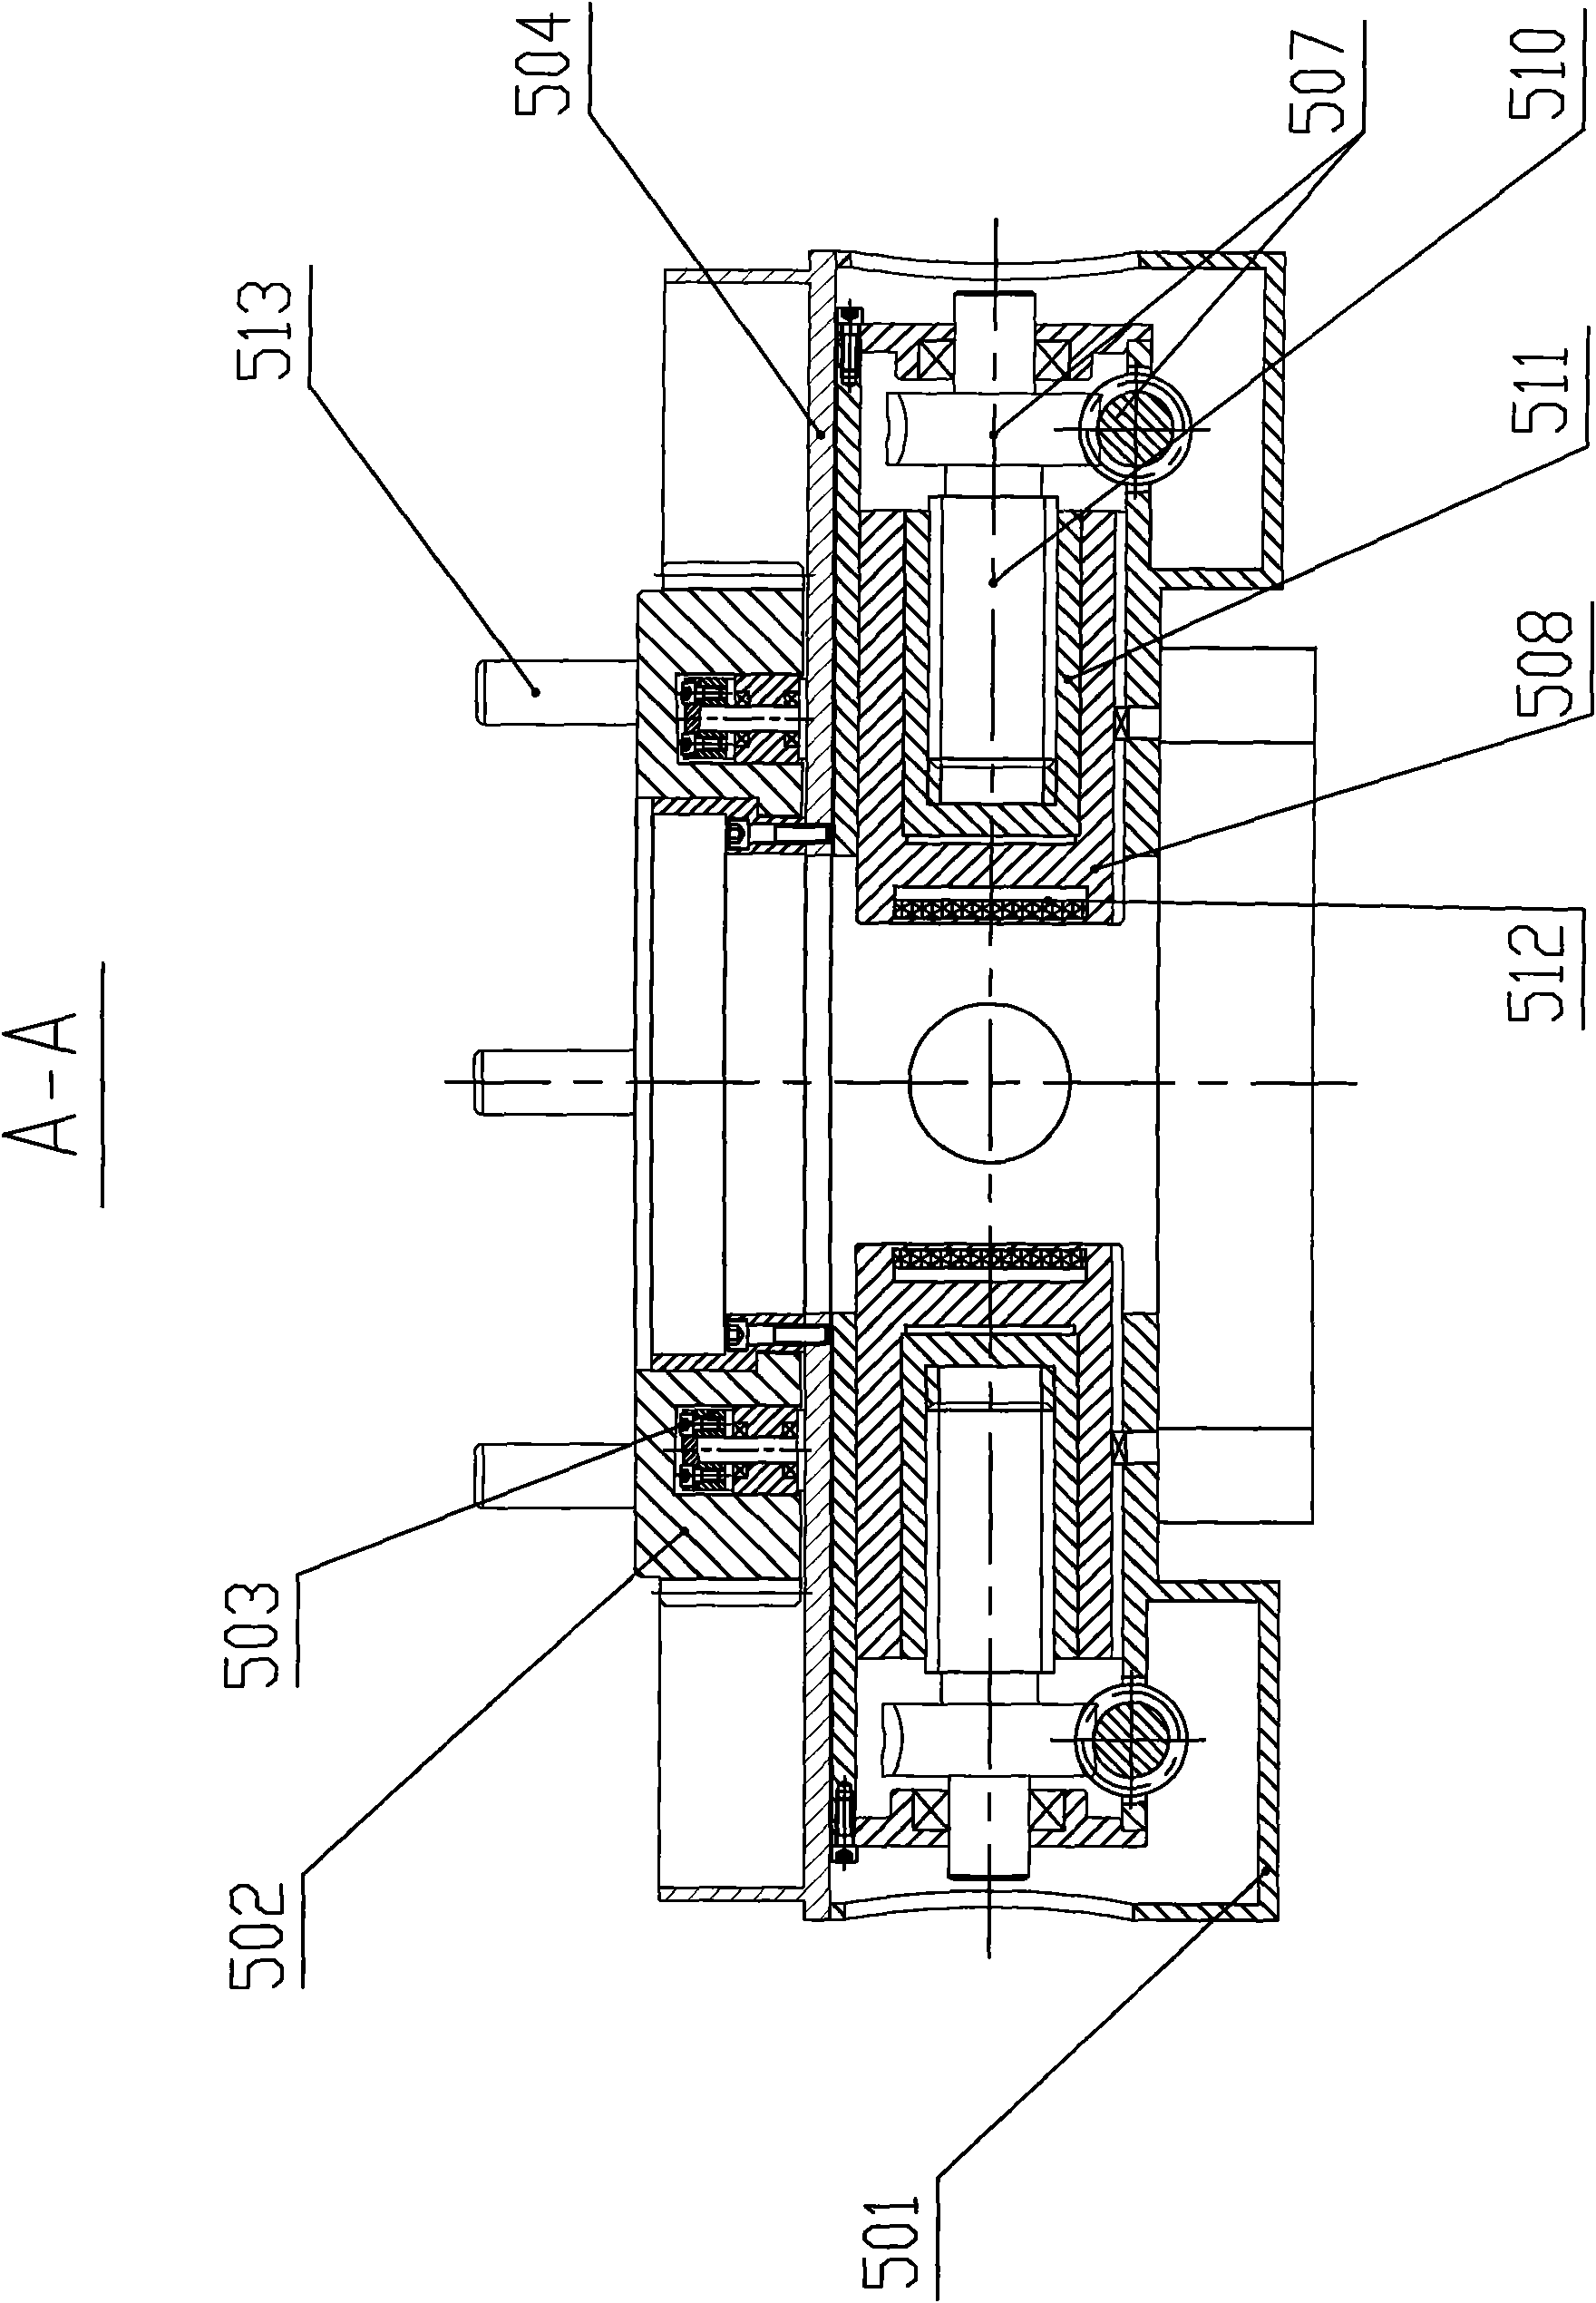 Screwing and buckling clamp for connecting and disassembling drill rod and sleeve pipe